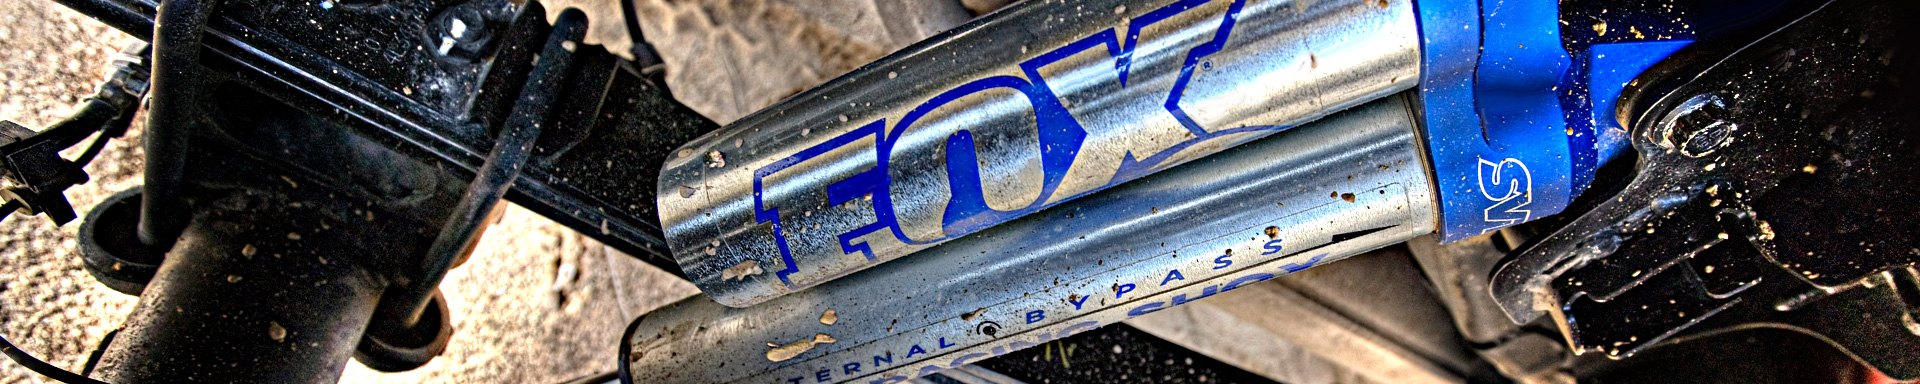 Fox Racing Chassis & Suspension Parts